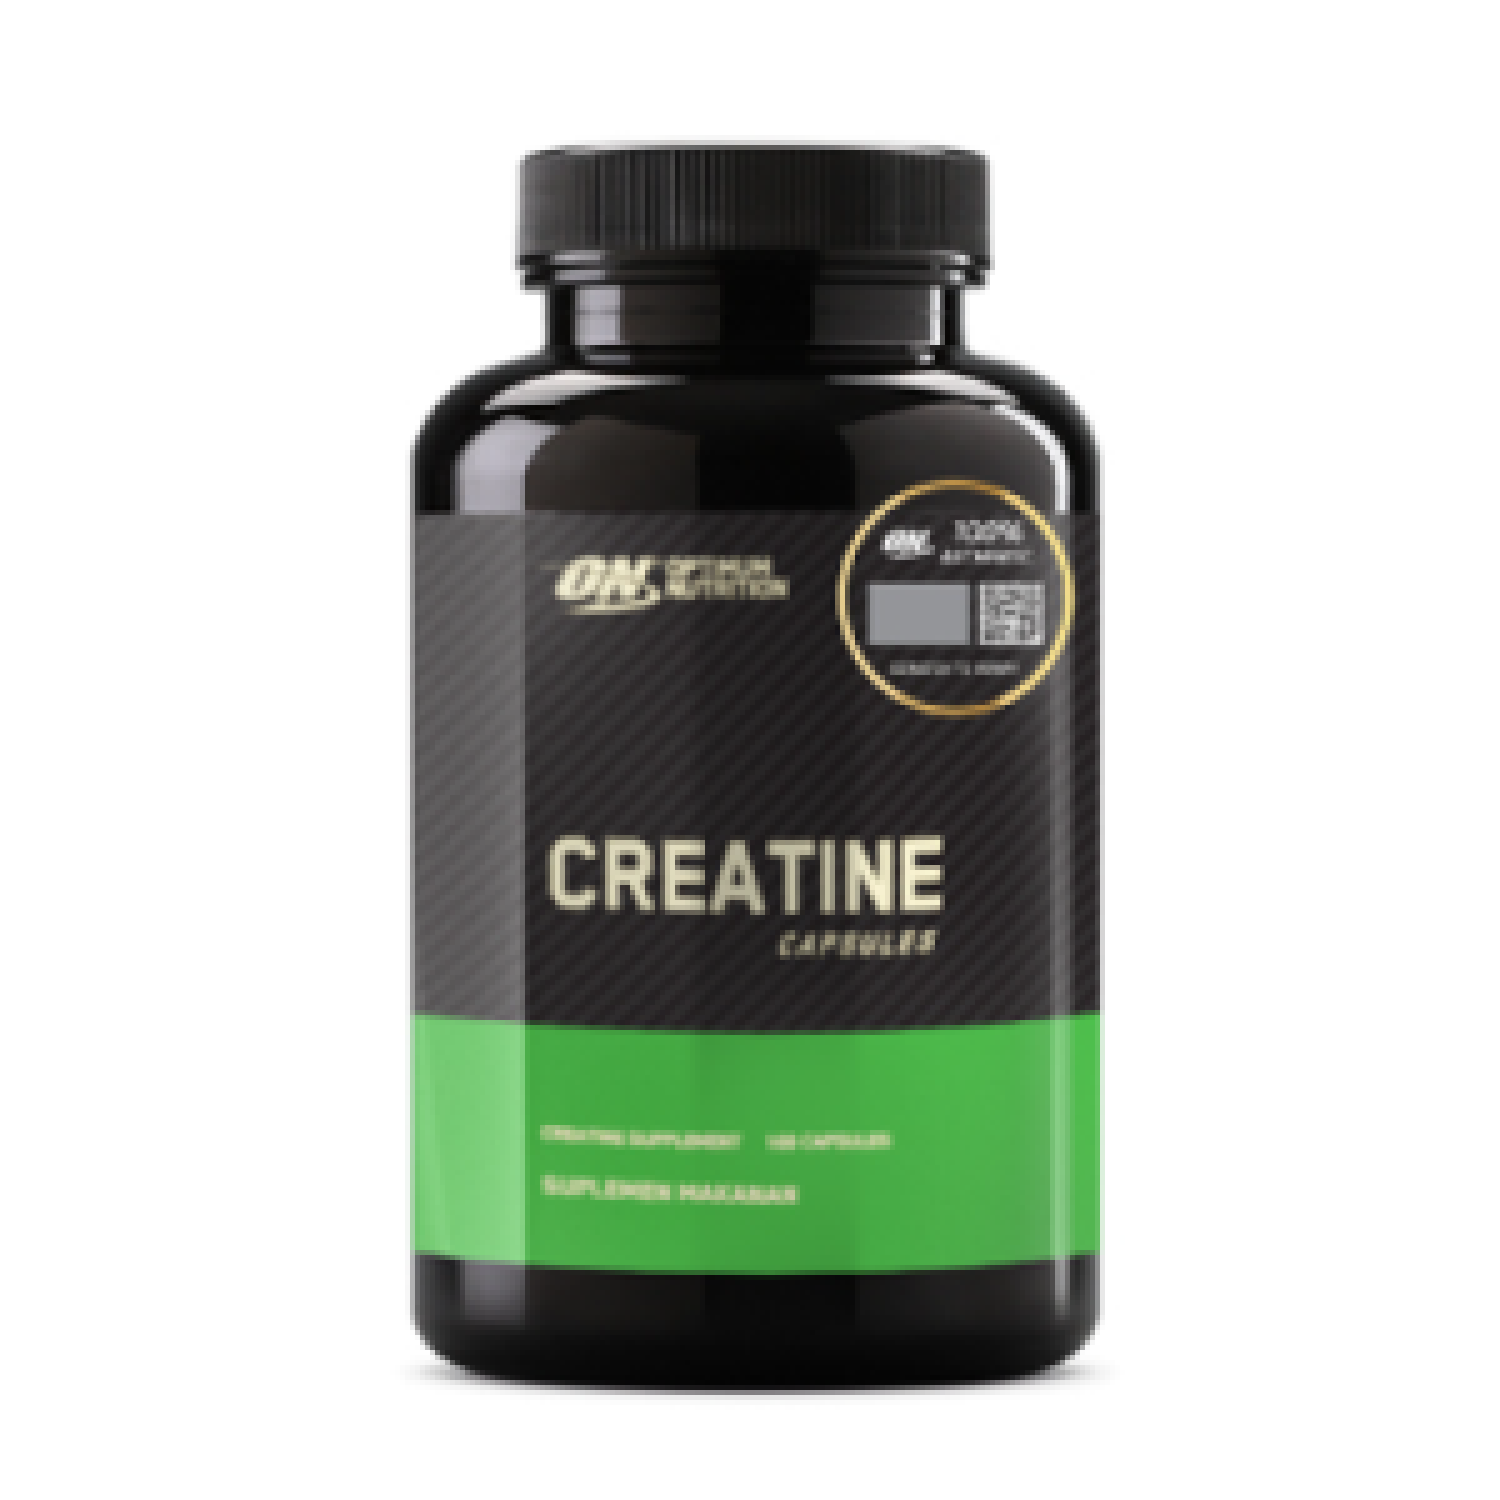 on-creatine-2500-caps-100-capsules-exp-date-7-24-6537258757a17.png